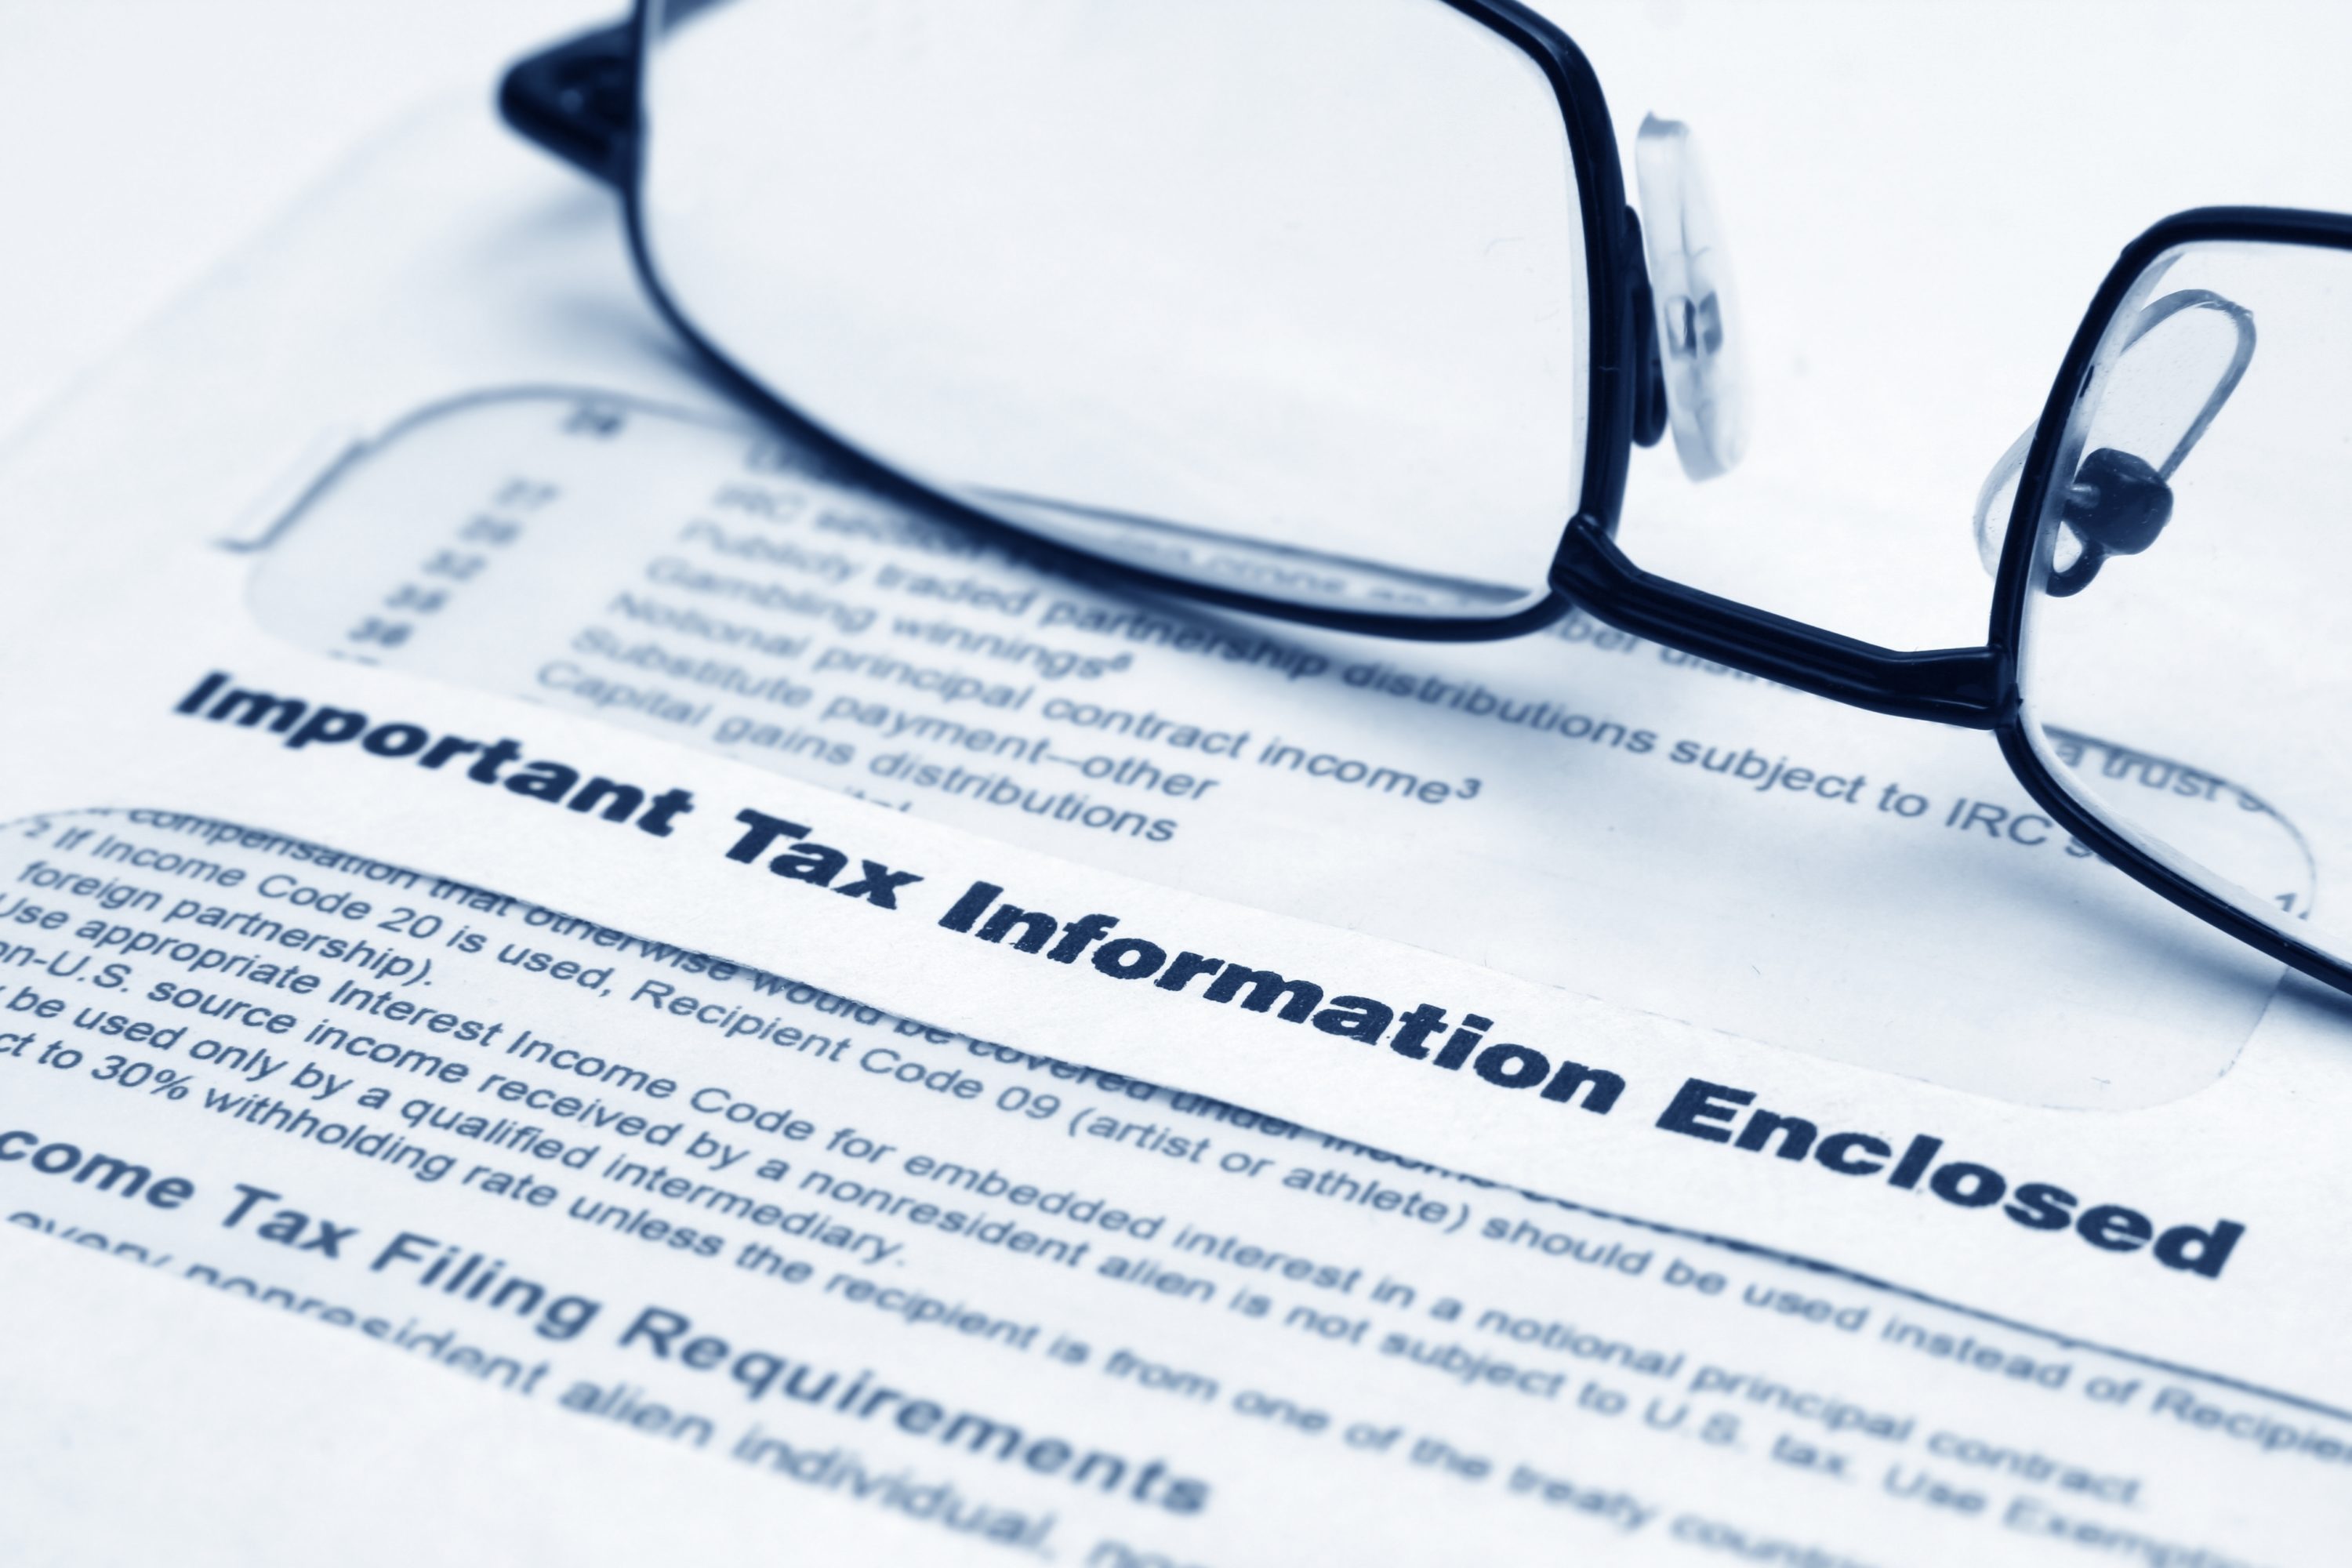 Regaining your tax-exempt status if you failed to file Form 990s